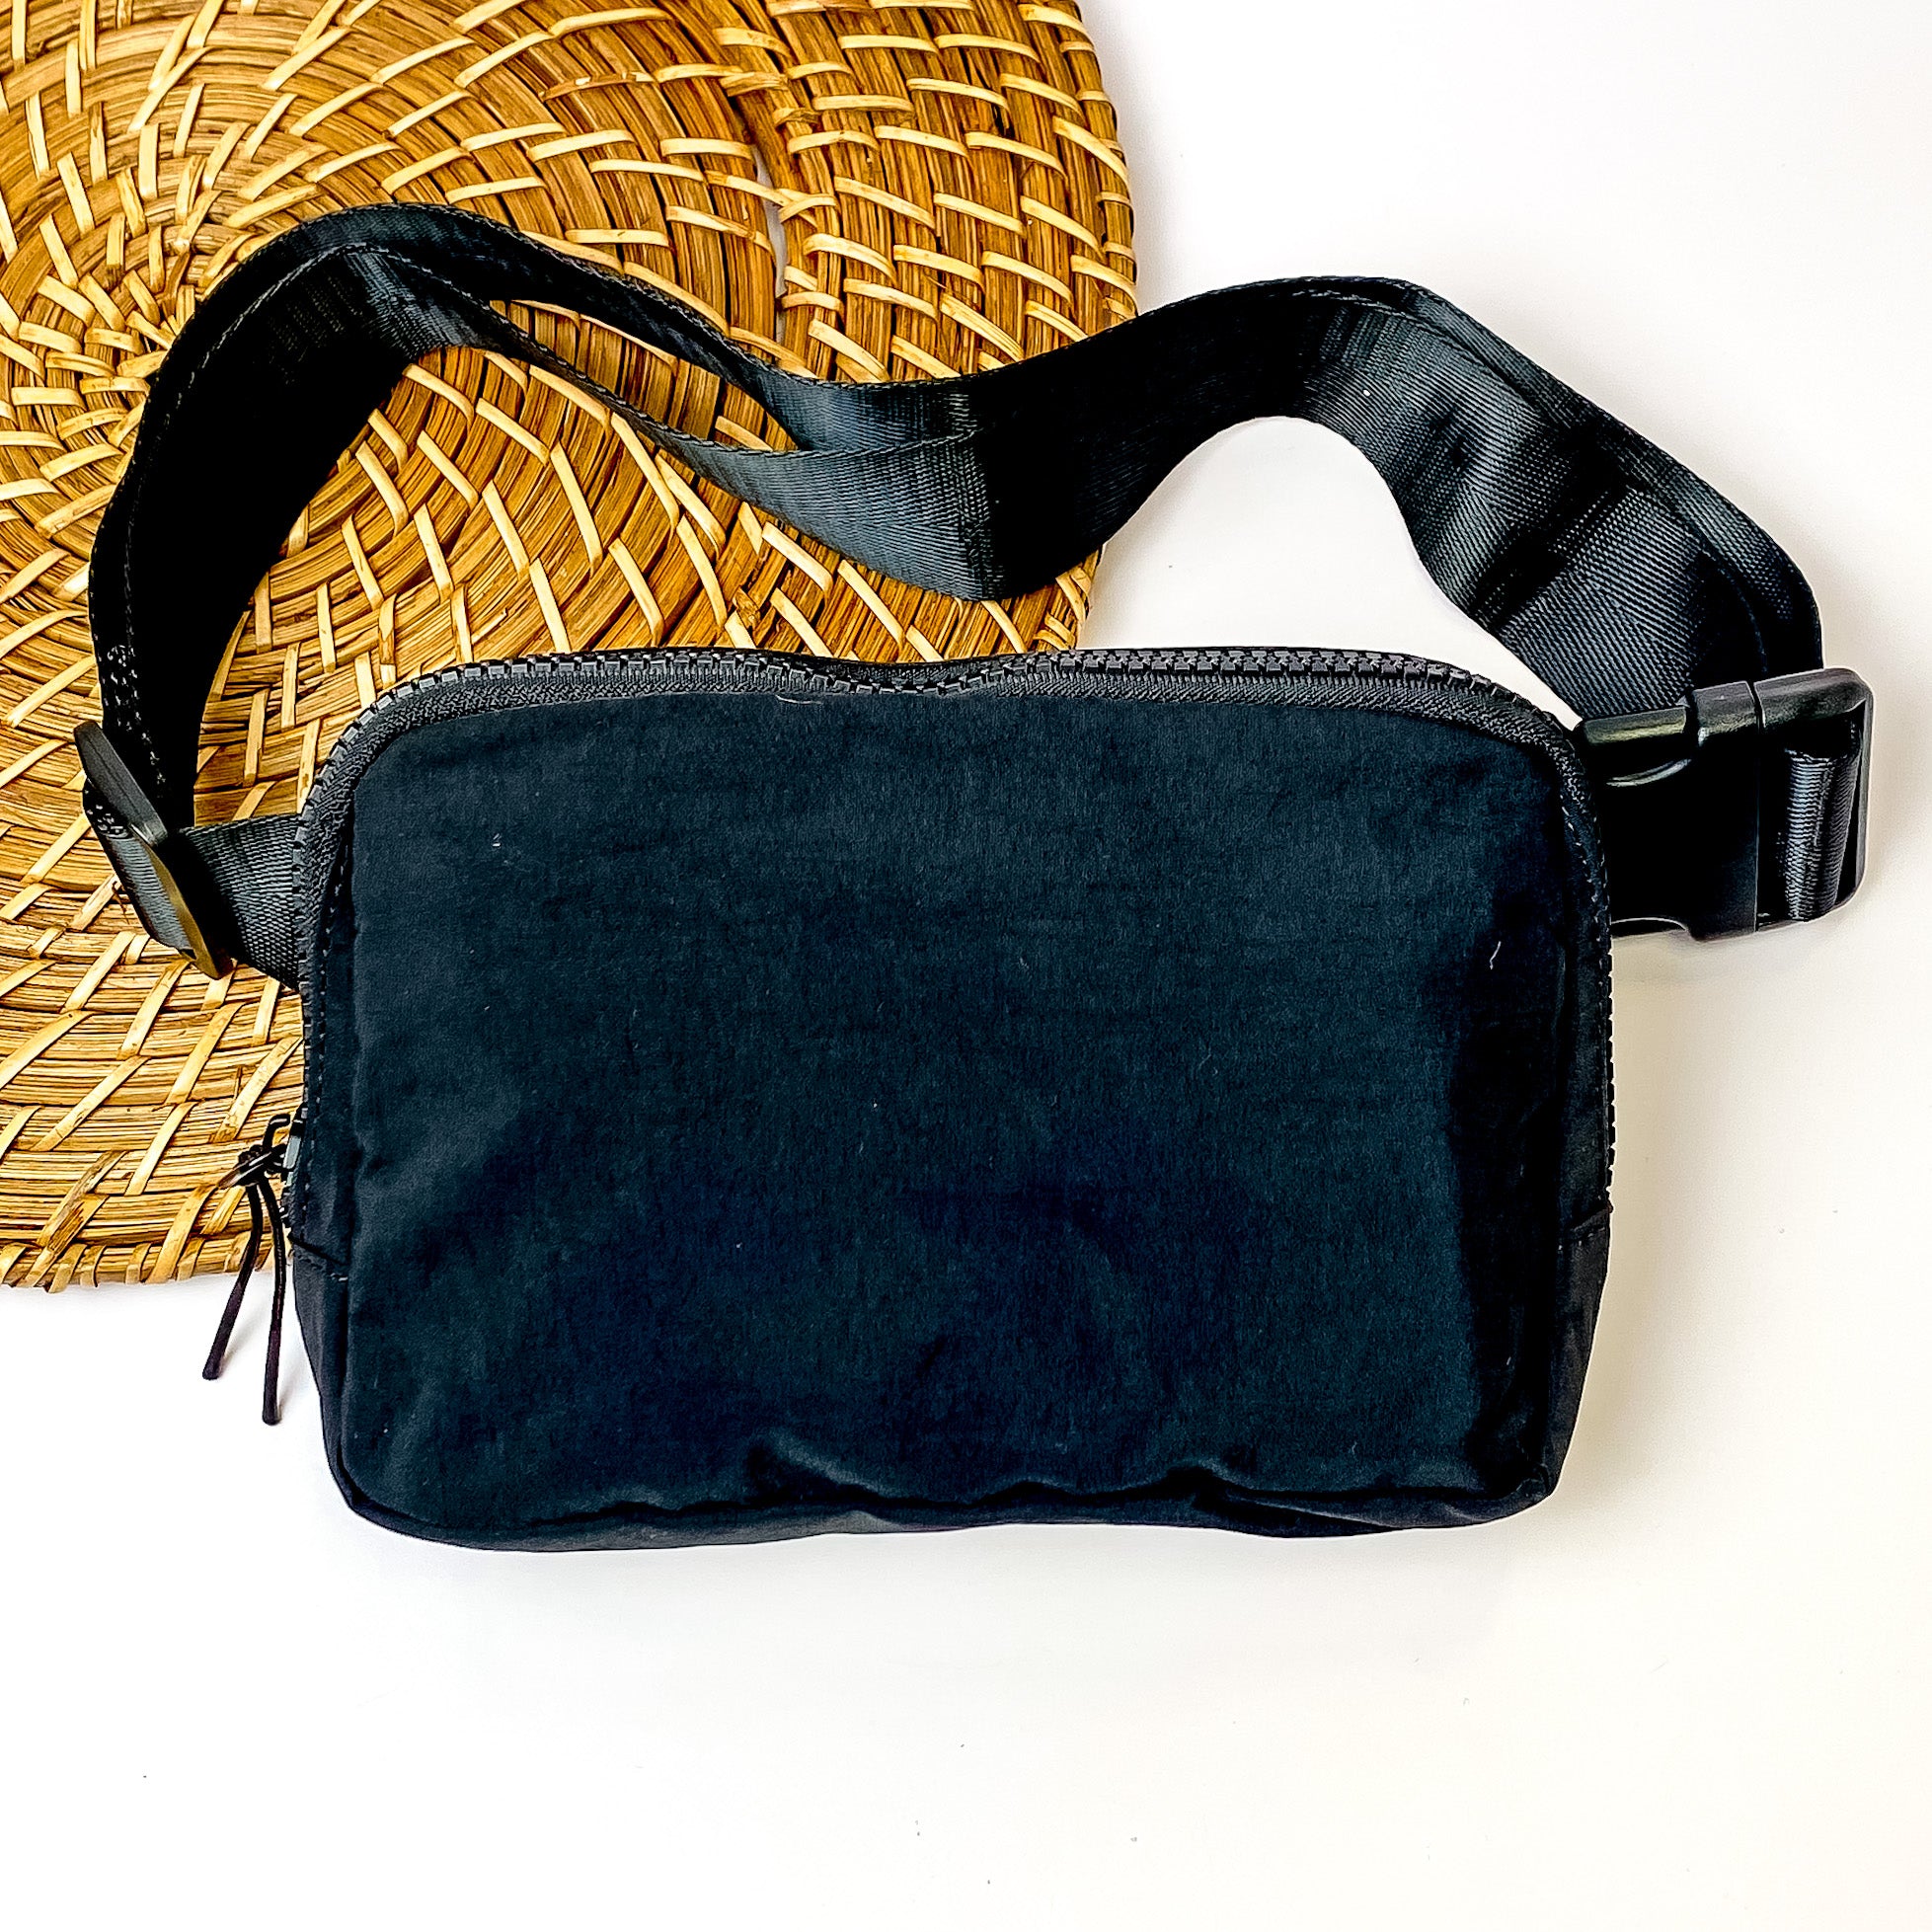 Pictured is a rectangle fanny pack with a top zipper with tassel in black. This bag also includes a black strap and black accents. This bag is pictured on a white and brown patterned background. 